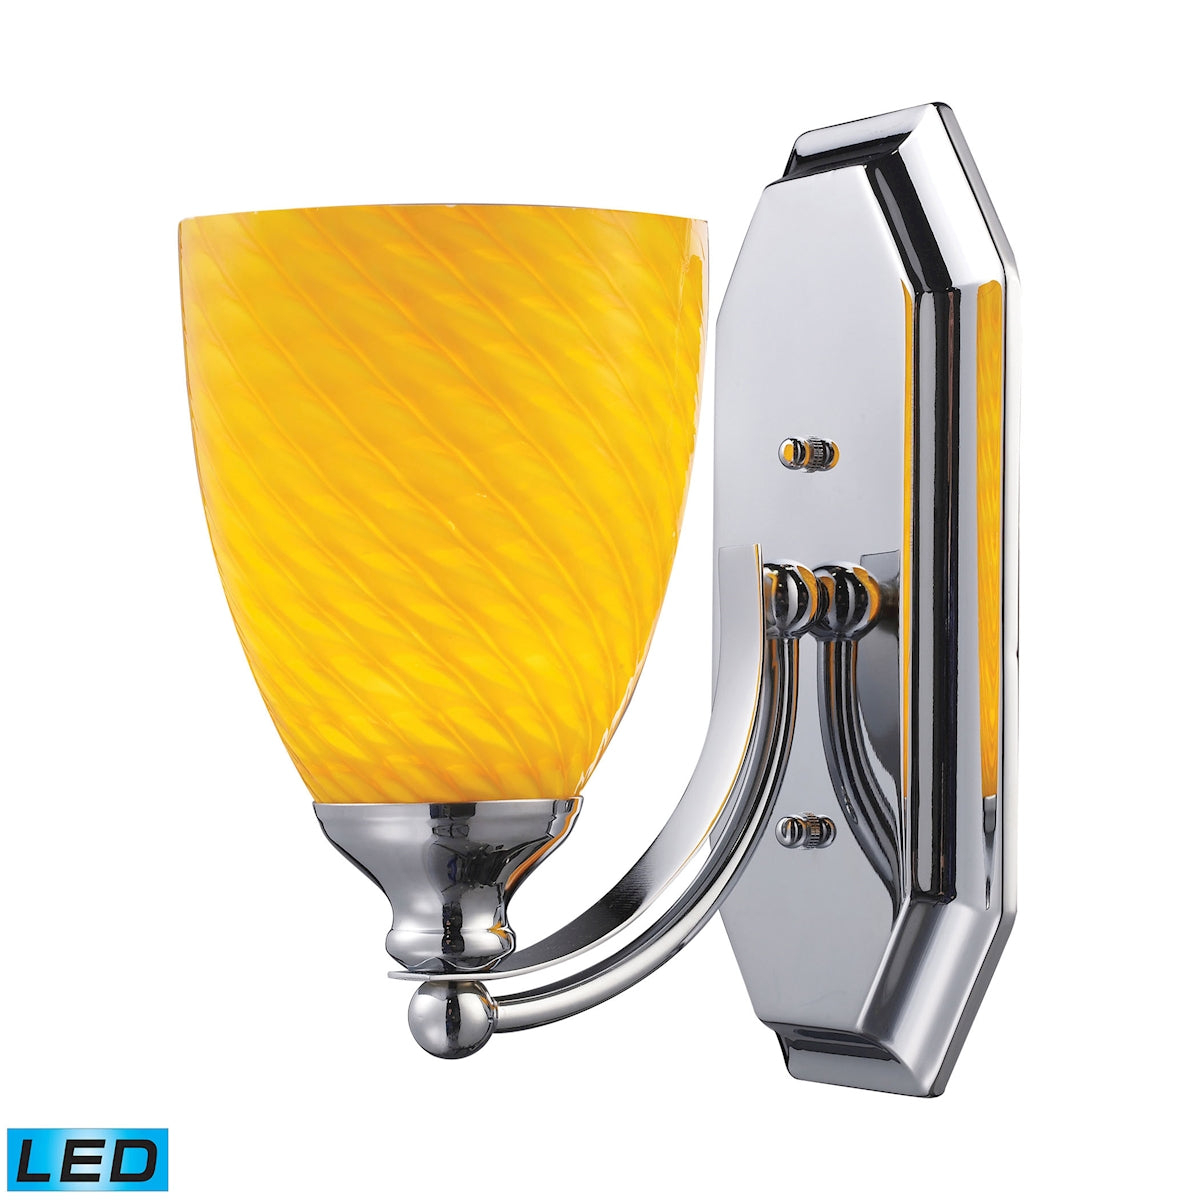 ELK Lighting 570-1C-CN-LED Mix and Match Vanity 1-Light Wall Lamp in Chrome with Canary Glass - Includes LED Bulb